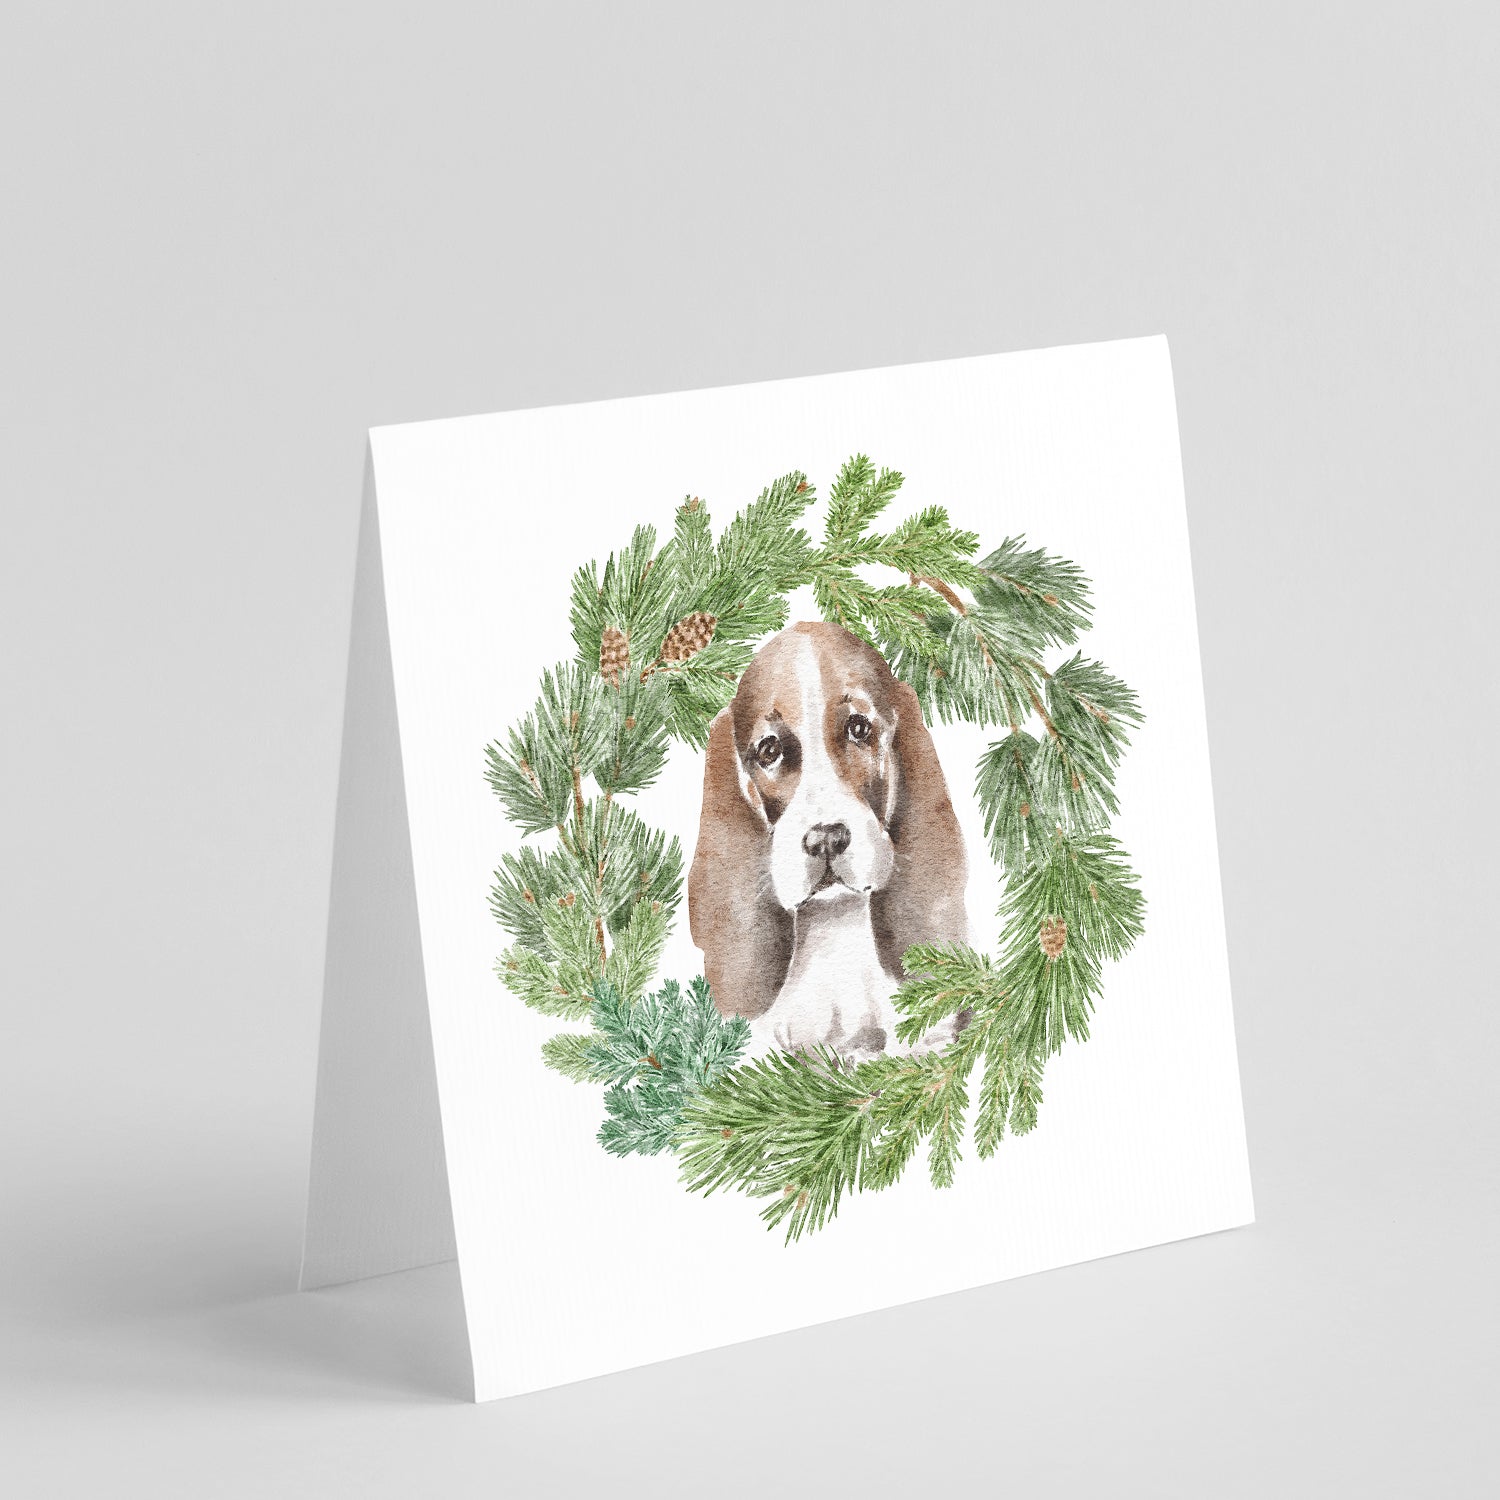 Buy this Basset Hound Puppy Brown White and Black with Christmas Wreath Square Greeting Cards and Envelopes Pack of 8